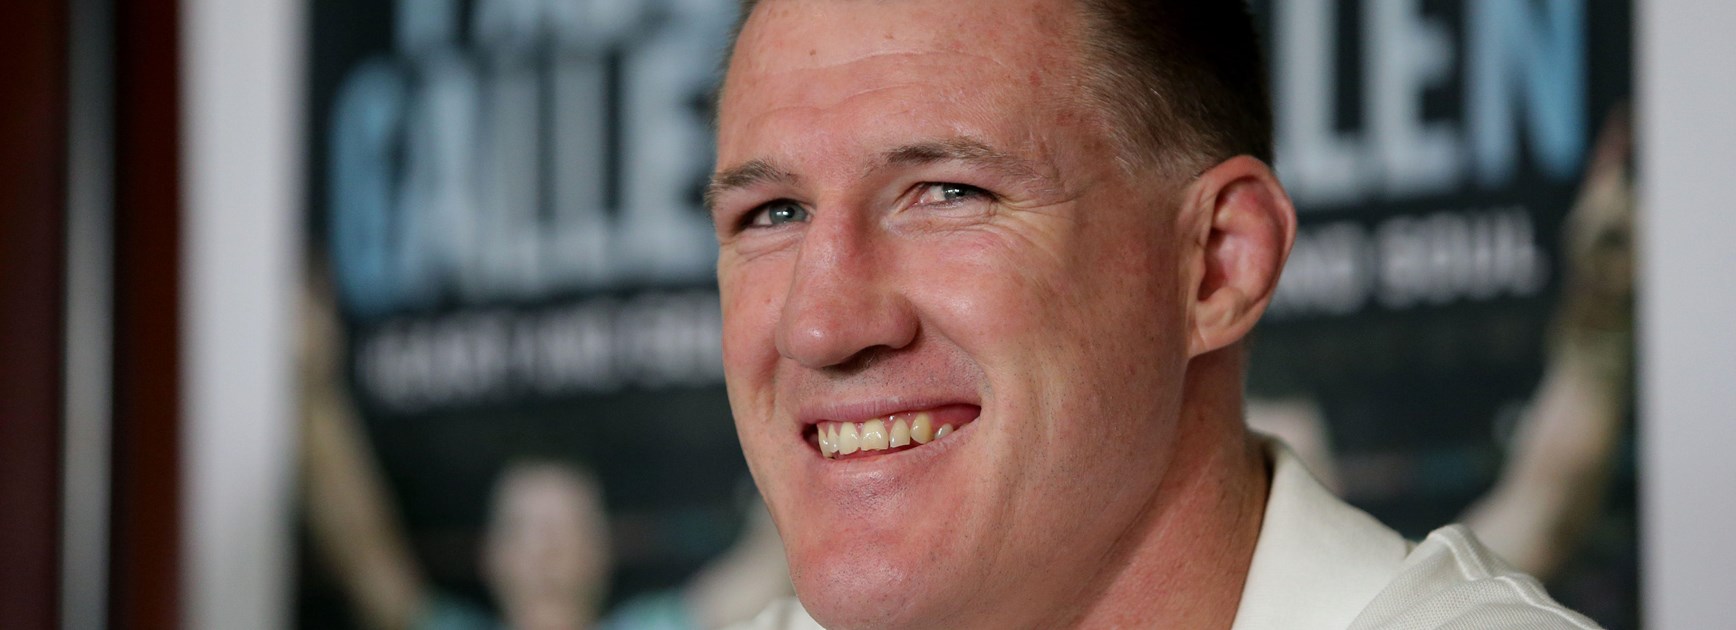 Paul Gallen at the launch of his book 'Heart and Soul'